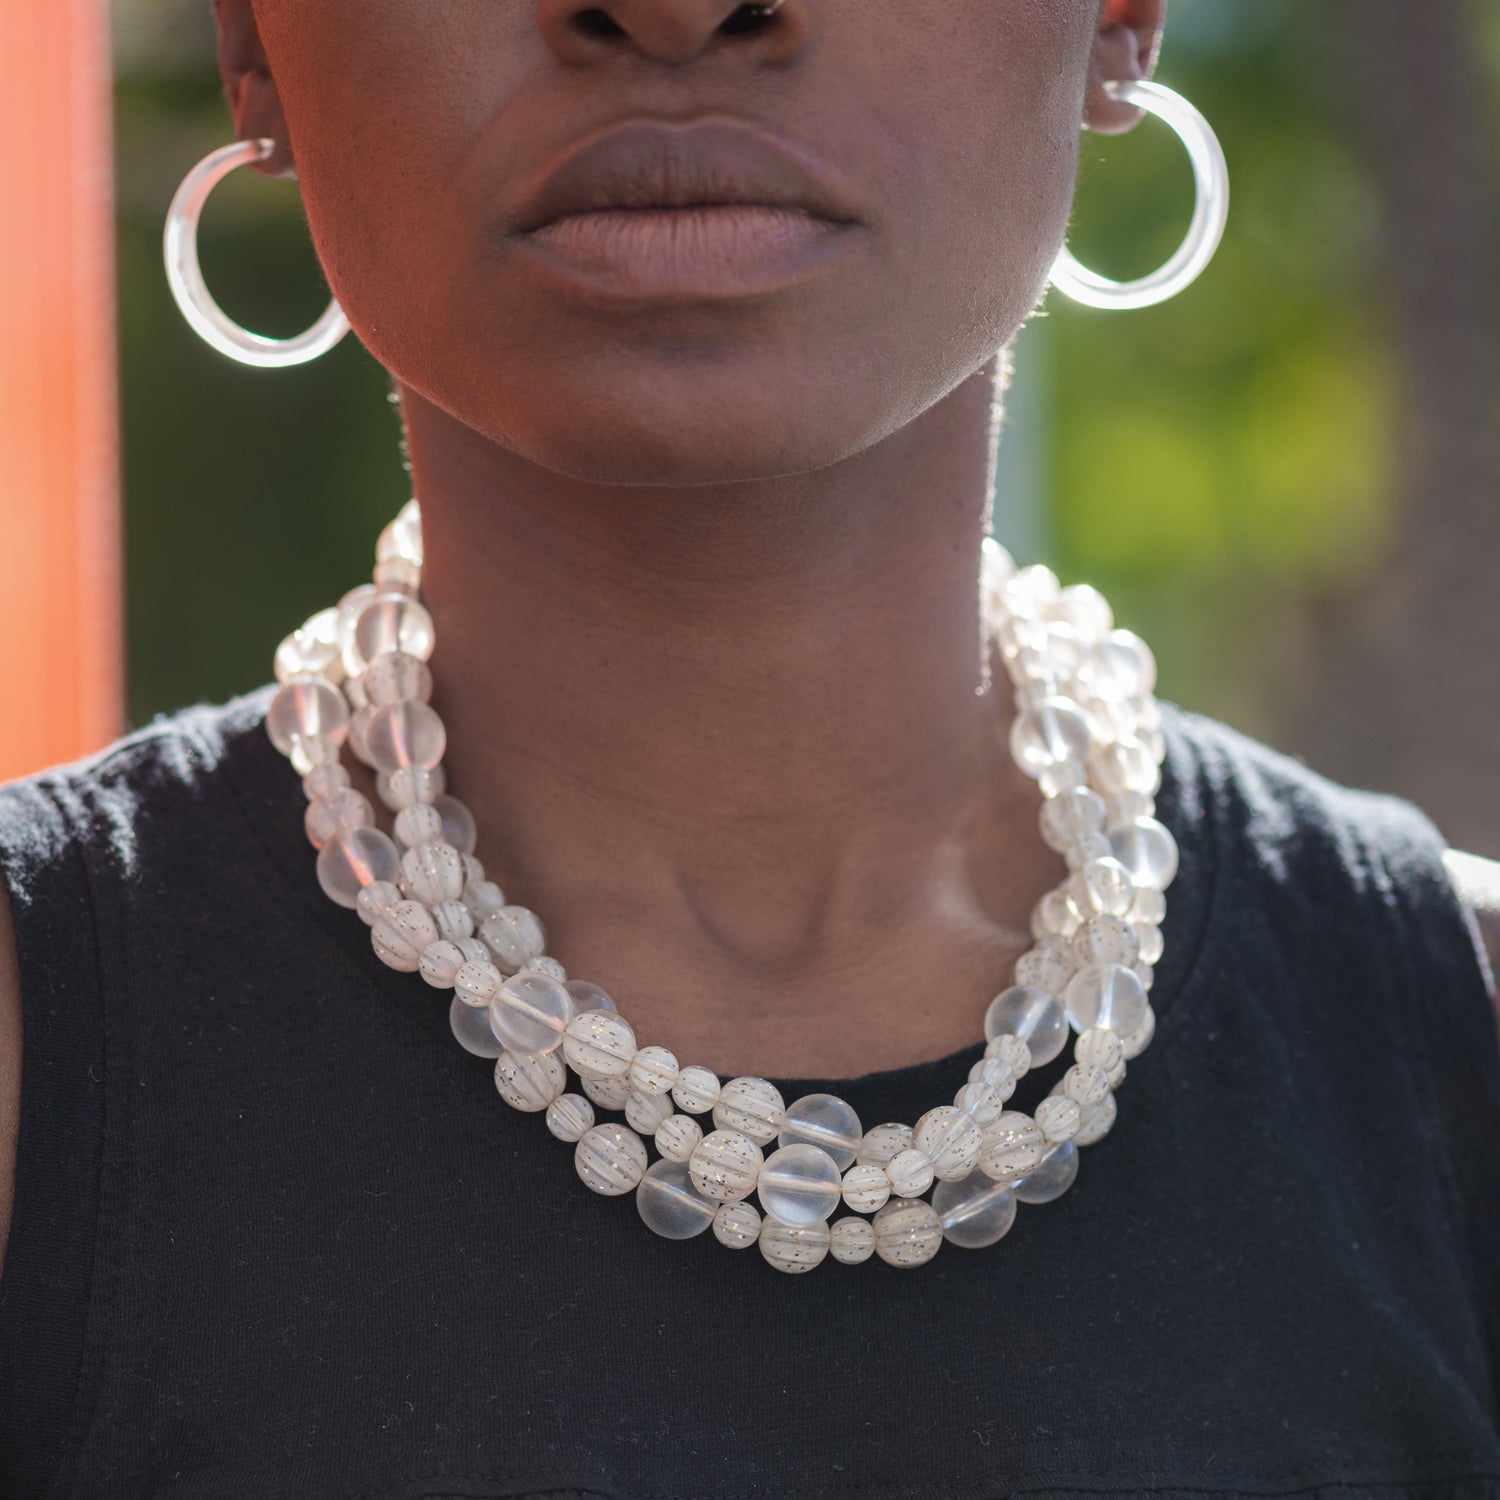 clear frosted statement necklace and earrings on model